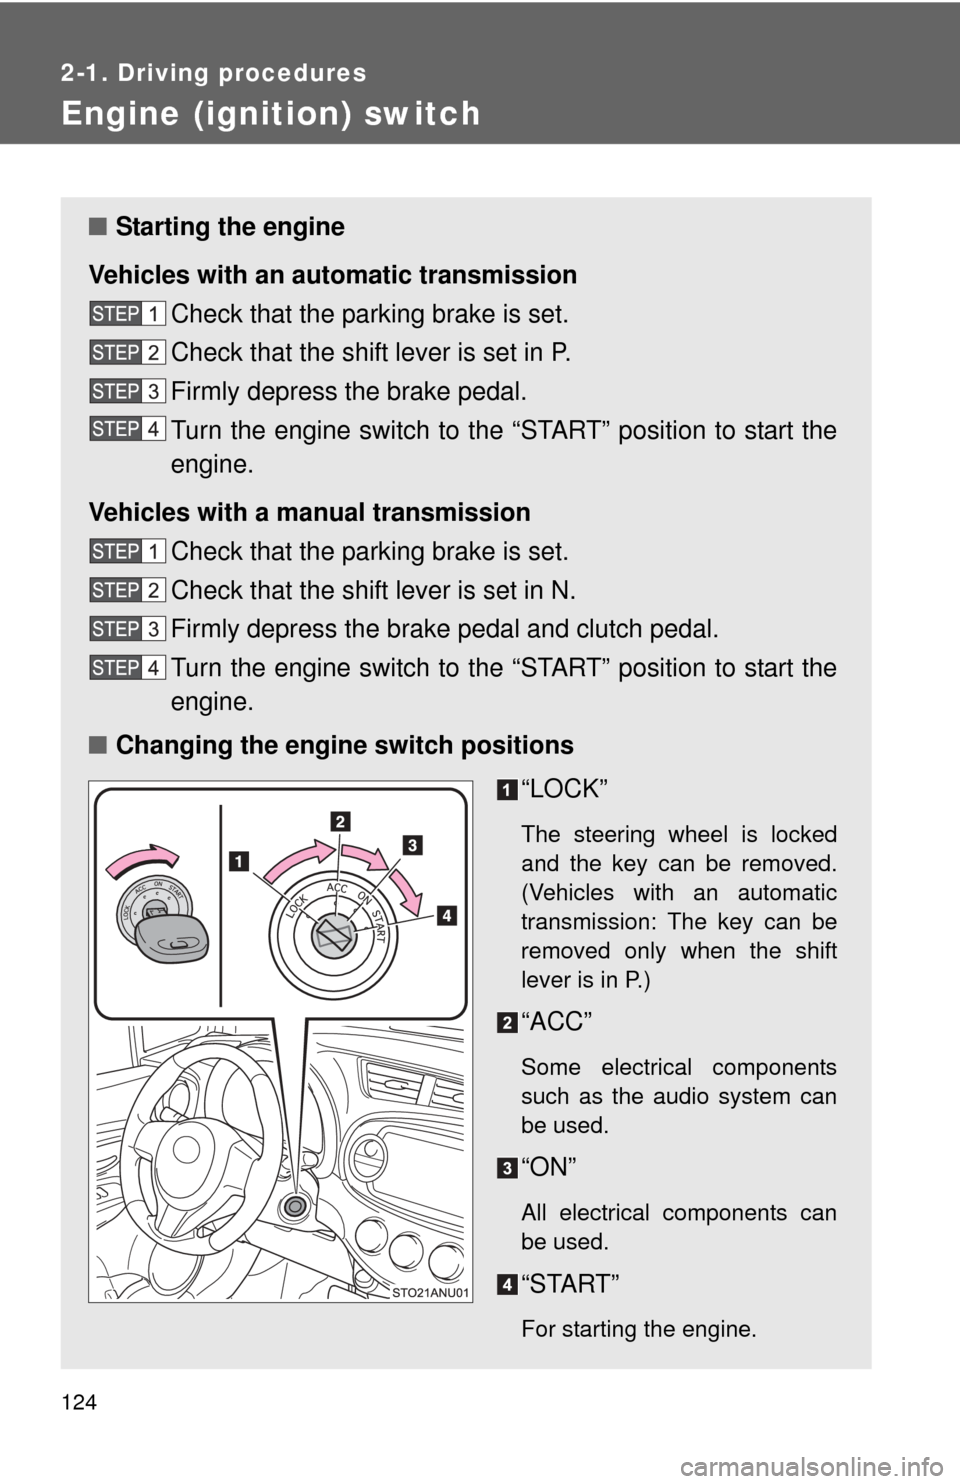 TOYOTA YARIS 2014 3.G Service Manual 124
2-1. Driving procedures
Engine (ignition) switch 
■Starting the engine
Vehicles with an au tomatic transmission
Check that the parking brake is set.
Check that the shift lever is set in P.
Firml